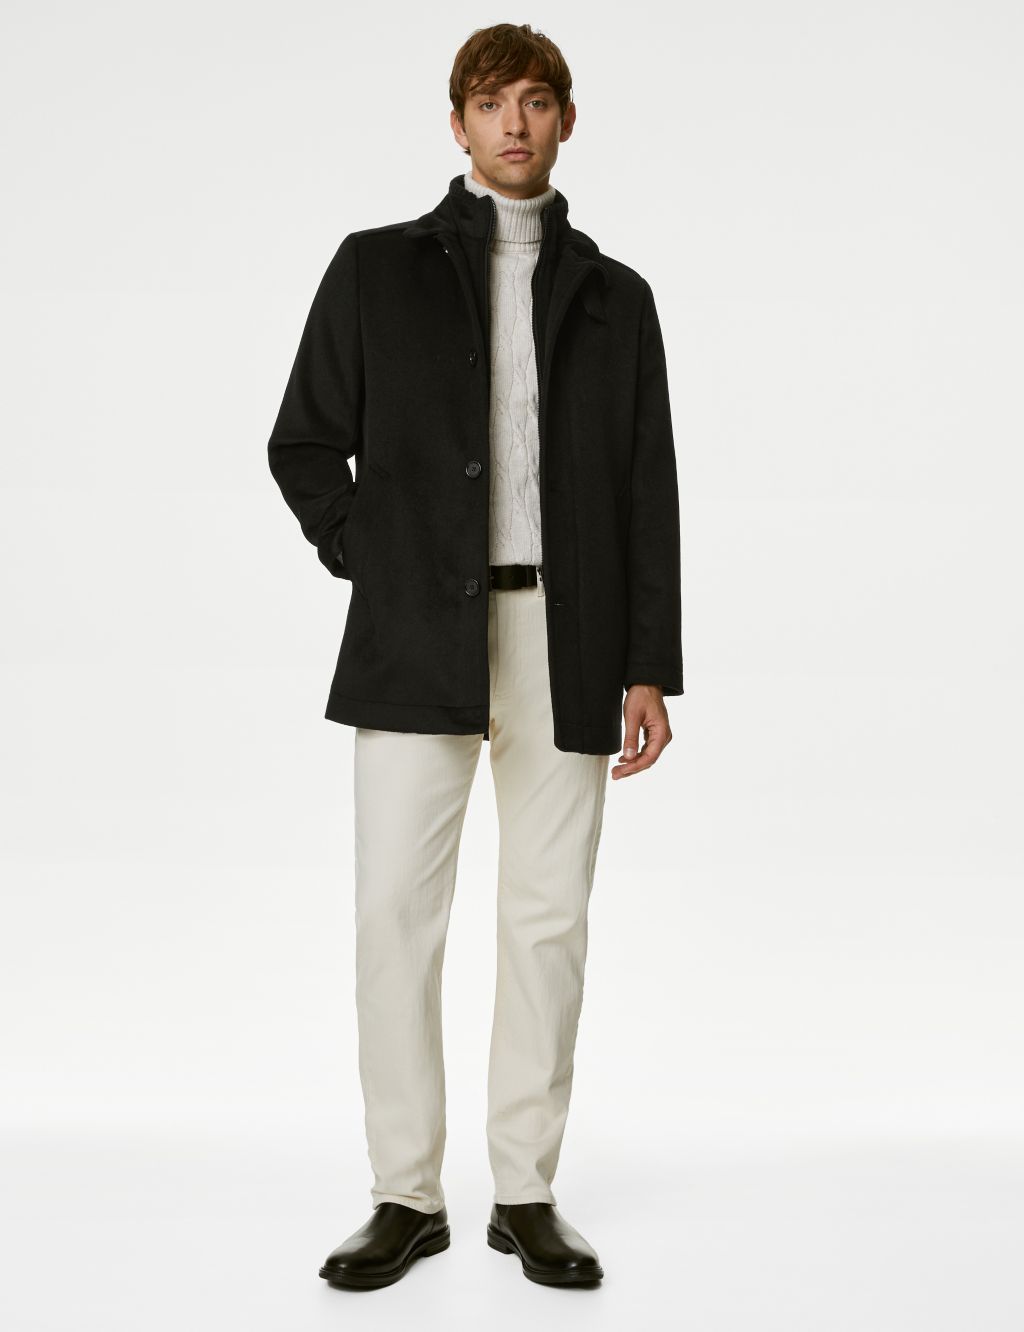 Wool Blend Double Collar Jacket image 1